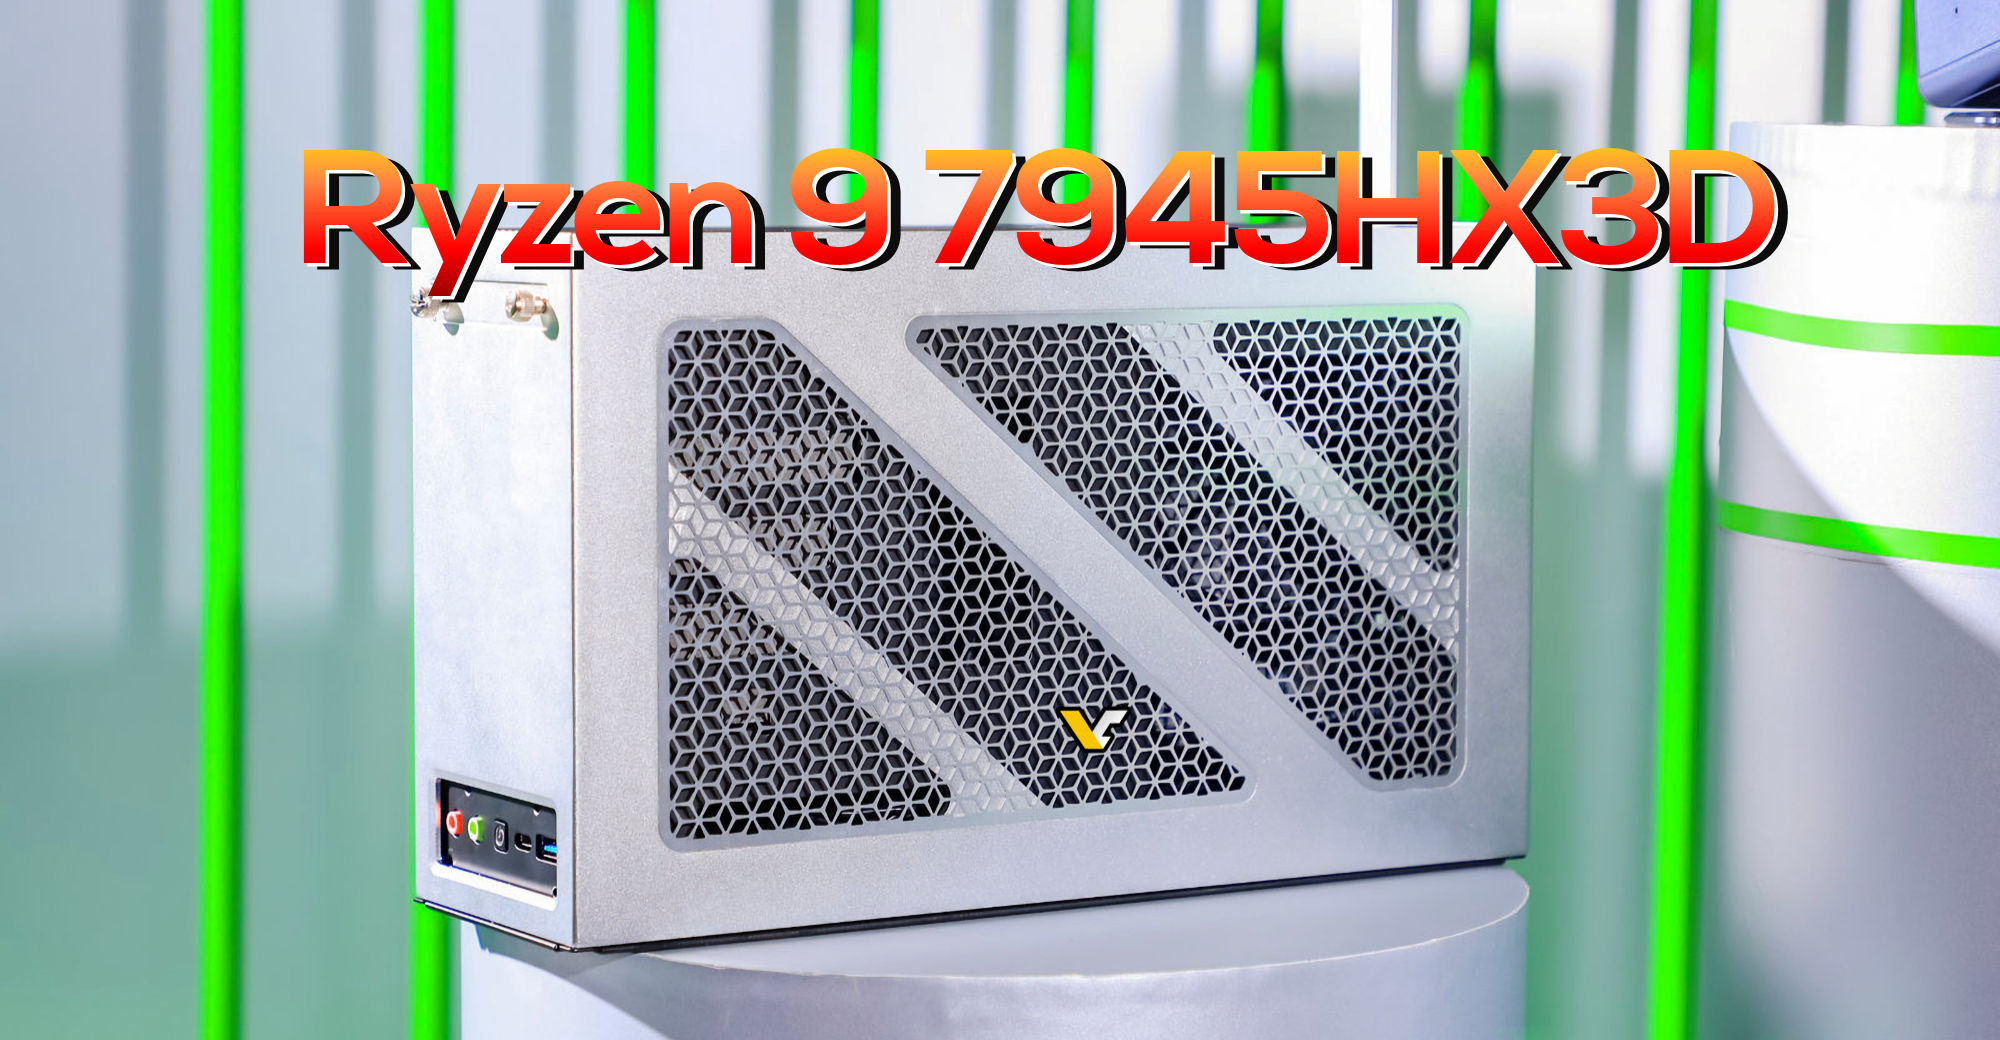 Minisforum SFF PC to feature up to 16-core Ryzen 9 7945HX3D with 3D V-Cache  